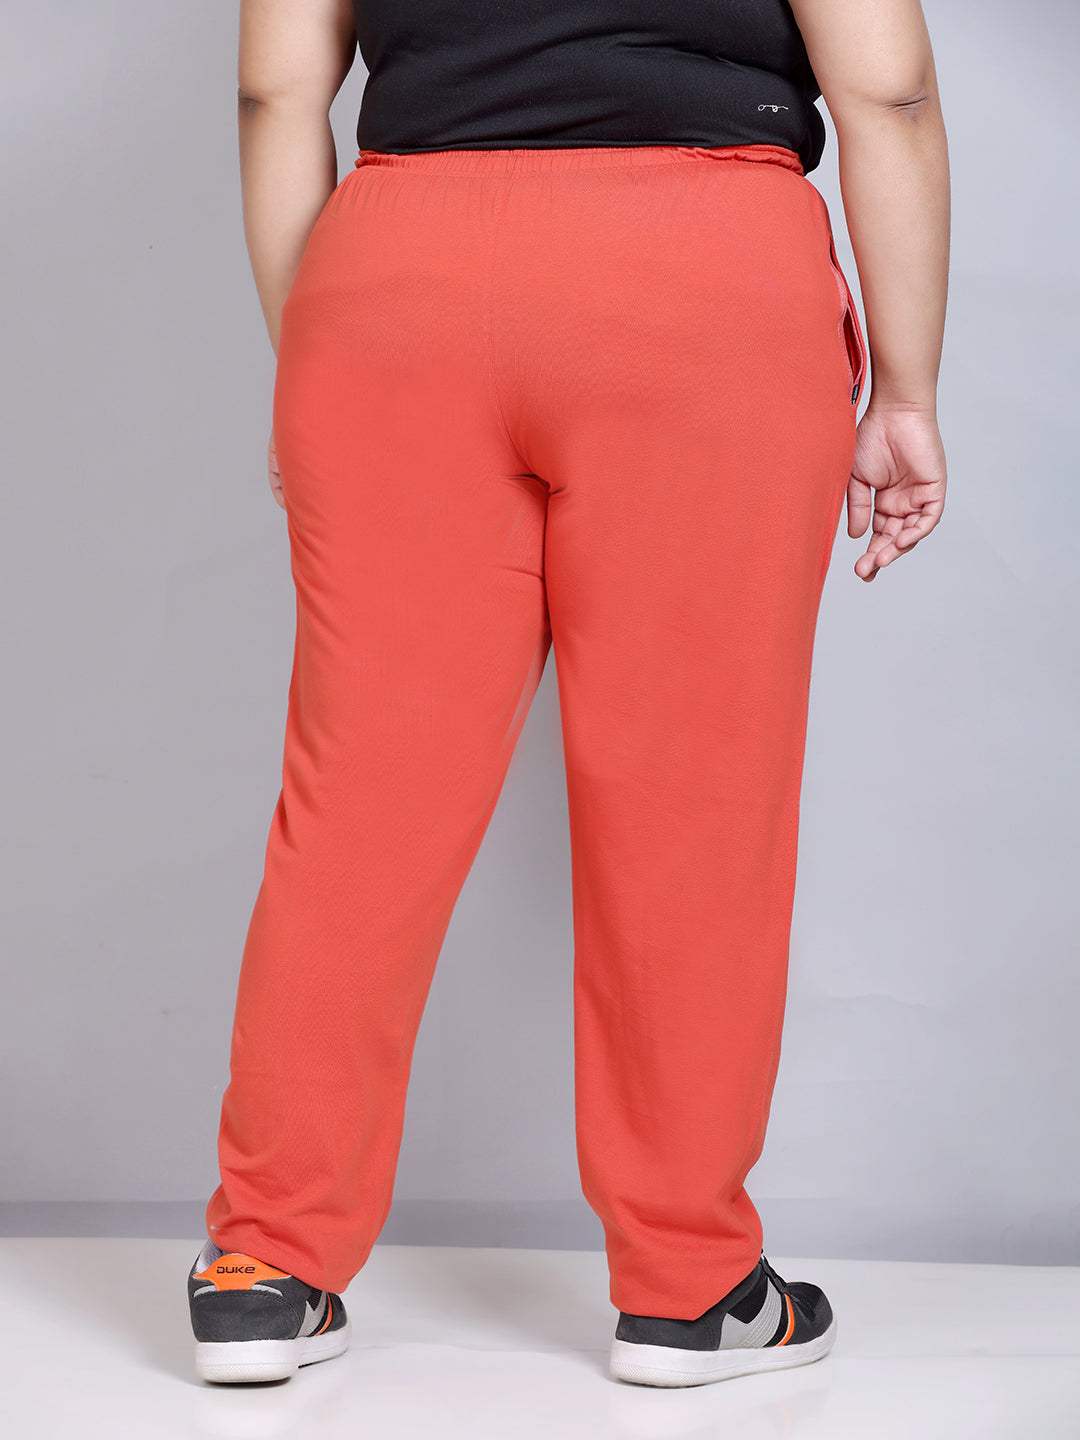 Solid Women Black Track Pants Price in India  Buy Solid Women Black Track  Pants online at Shopsyin